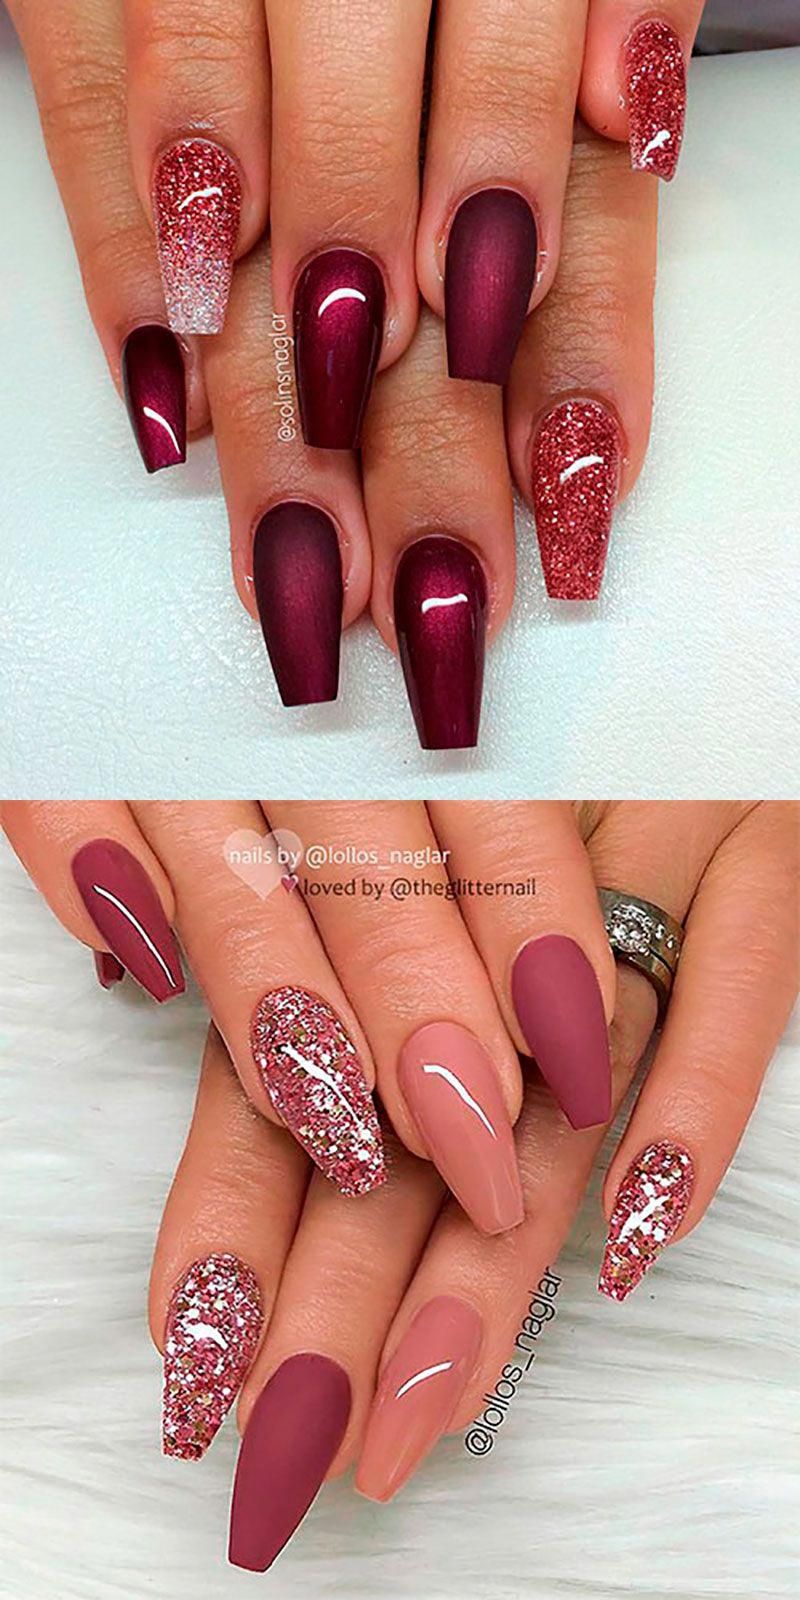 The Best Coffin Nails Ideas That Suit Everyone With Images Fialove Nehty Gelove Nehty Dlouhe Nehty